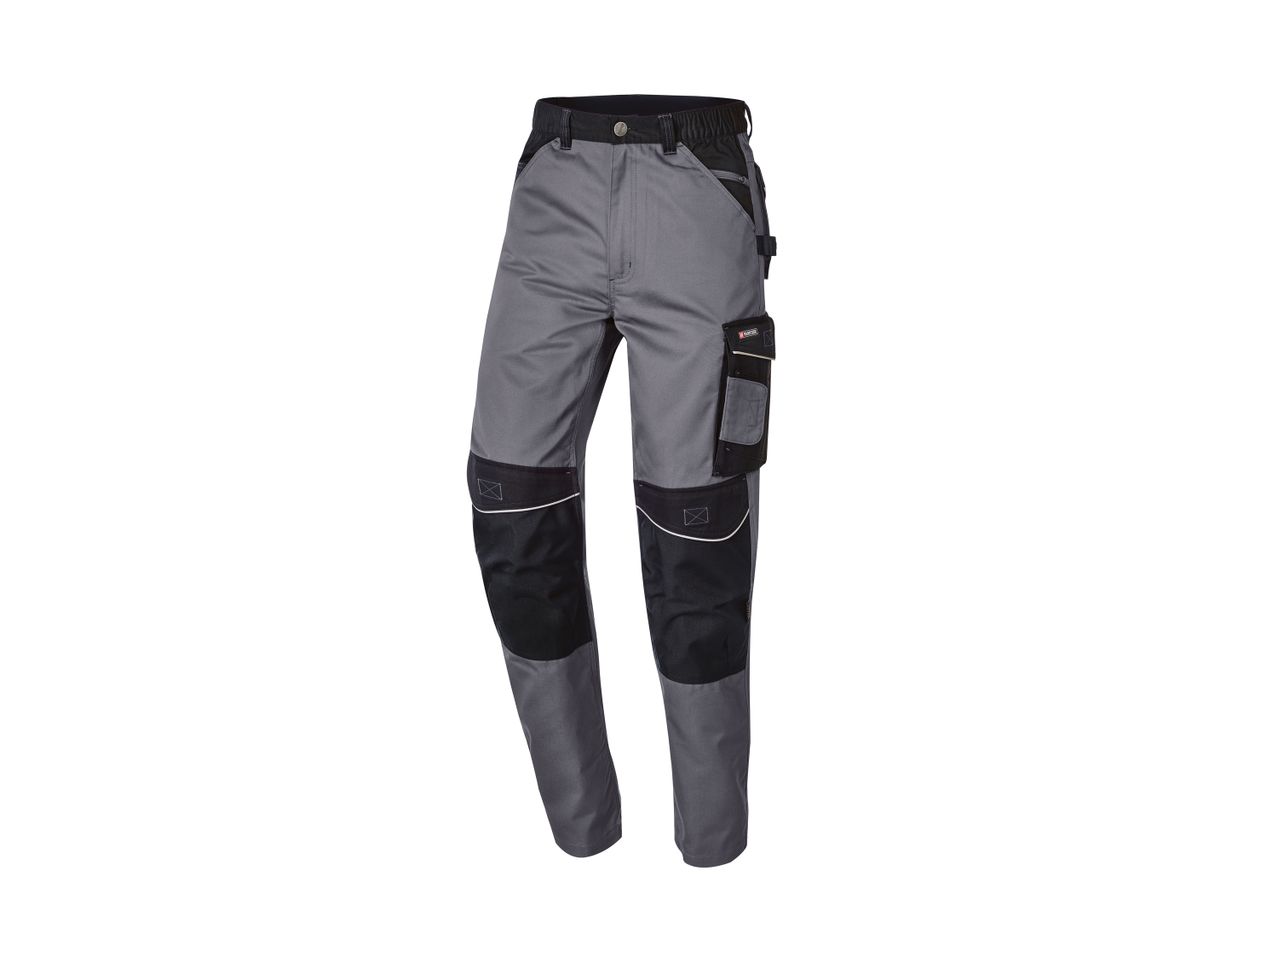 Go to full screen view: Men’s Work Trousers - Image 2